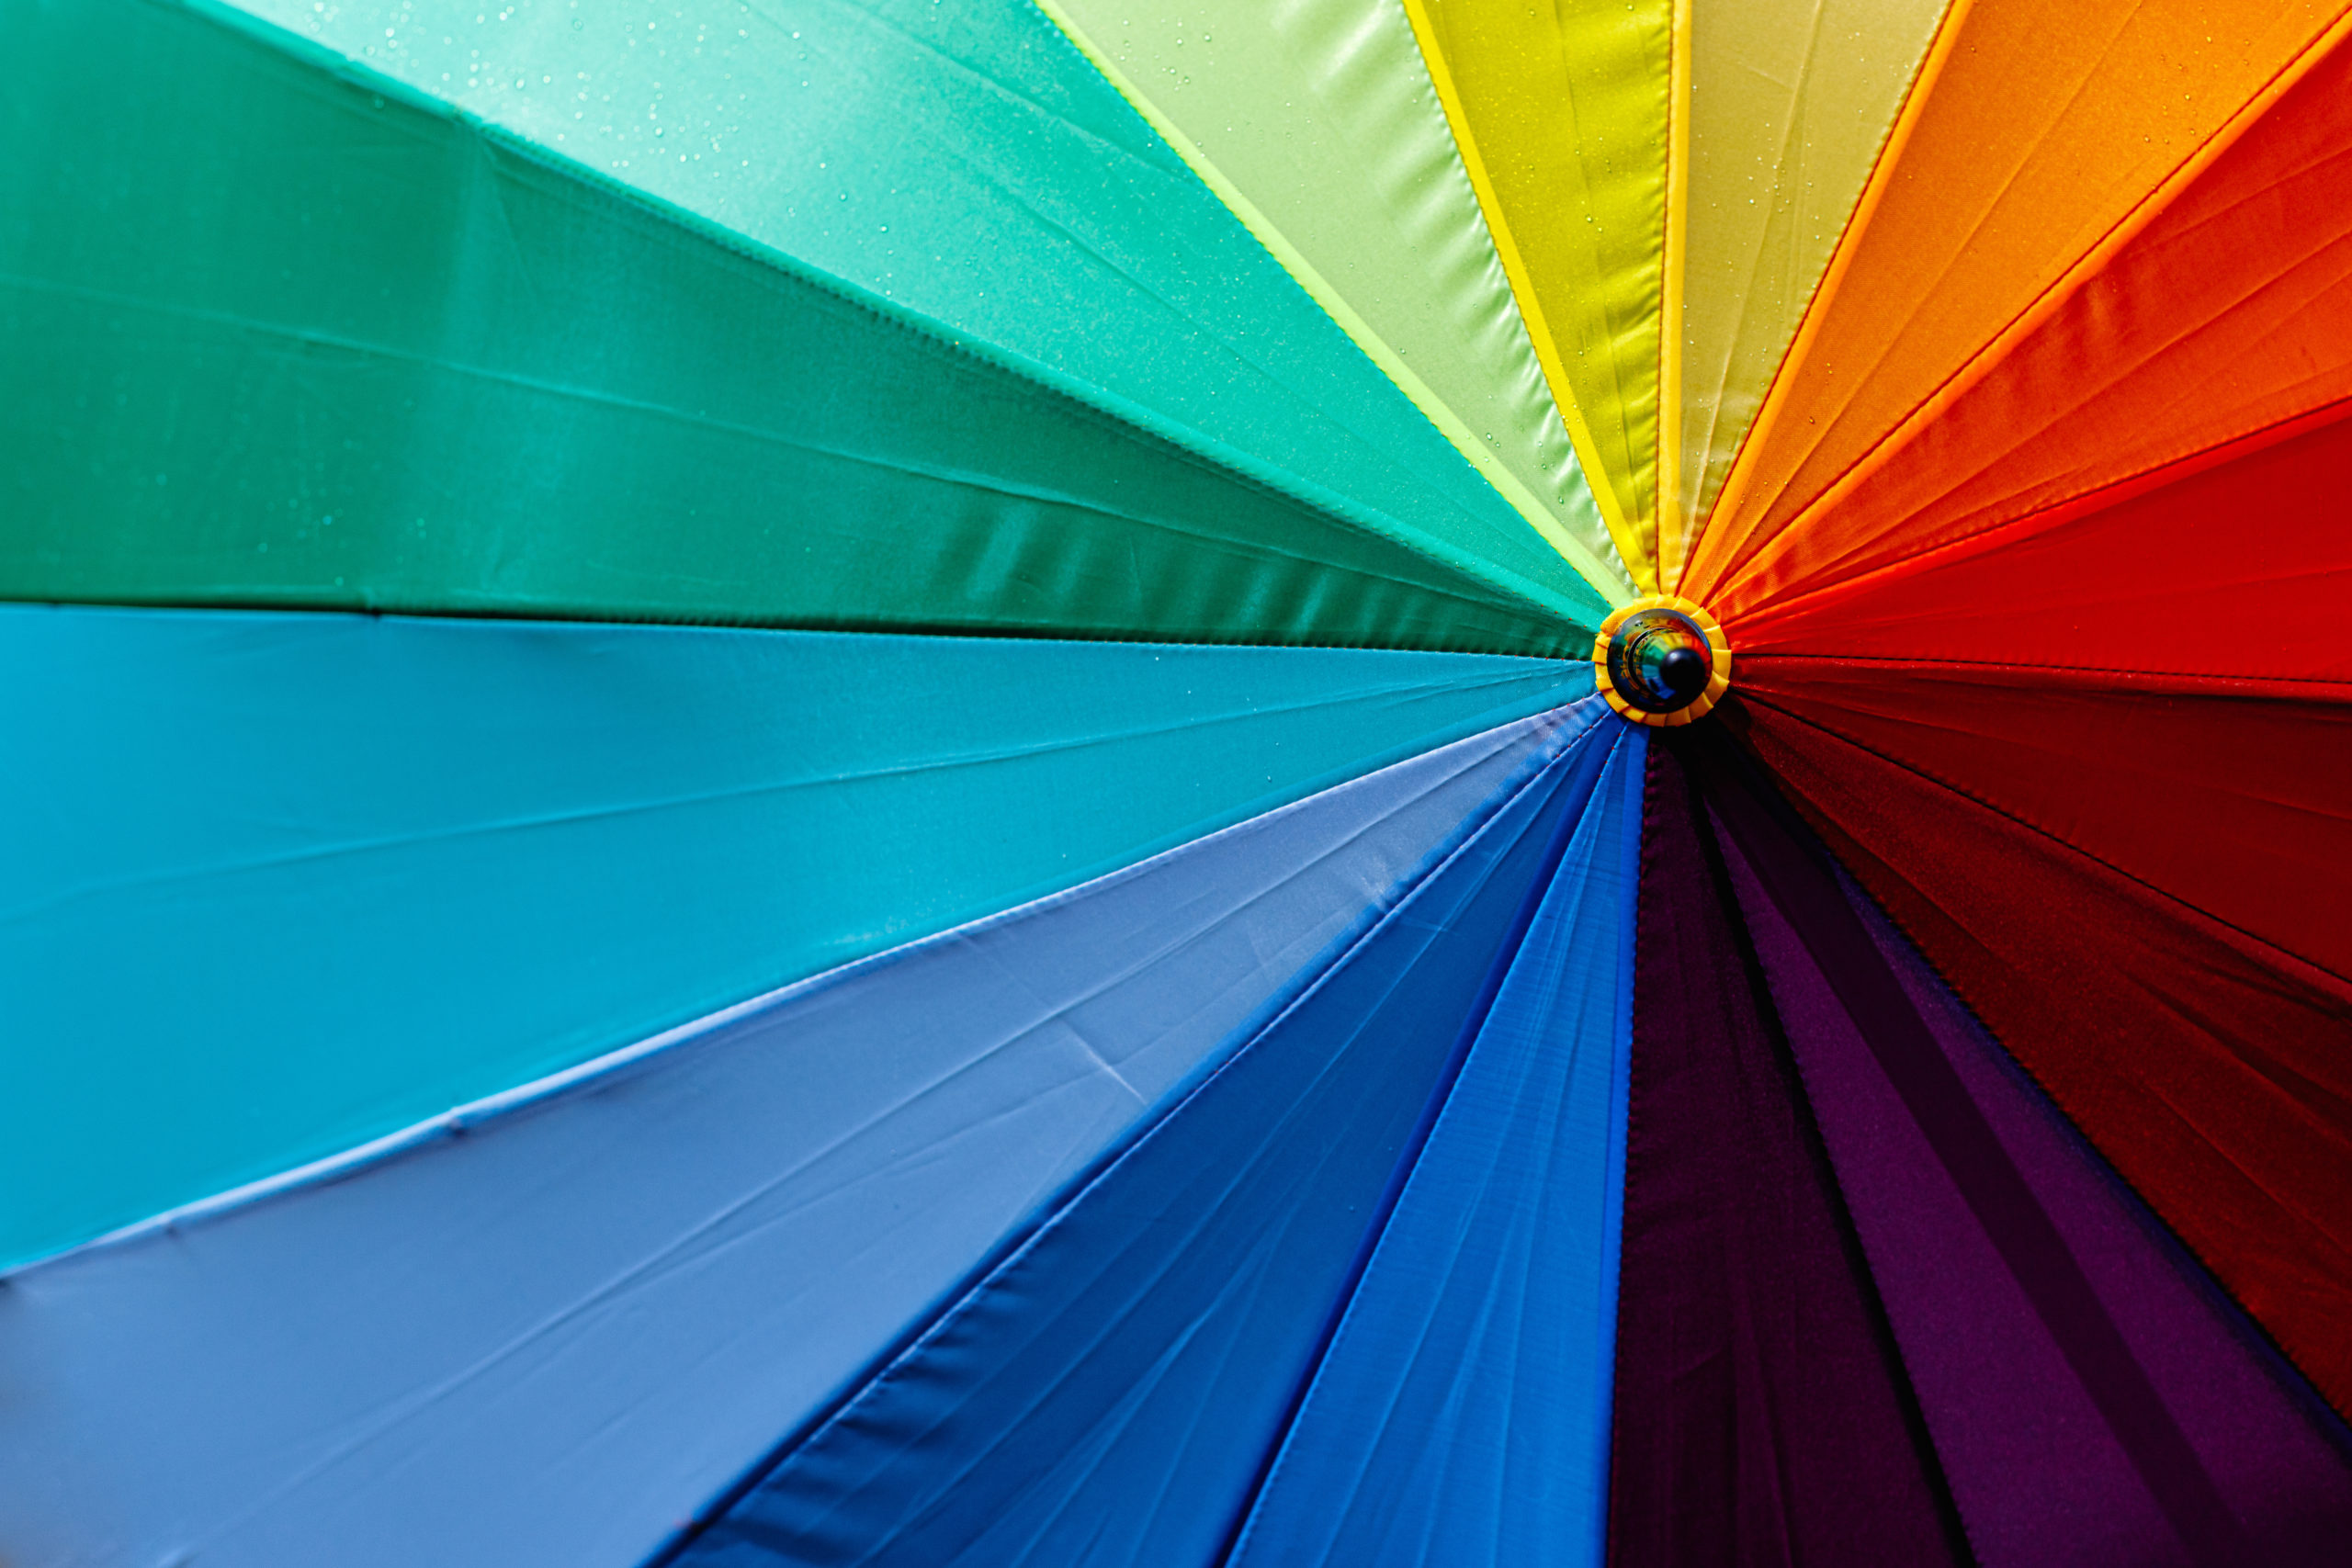 Umbrella with rainbow colors. Colorful background.